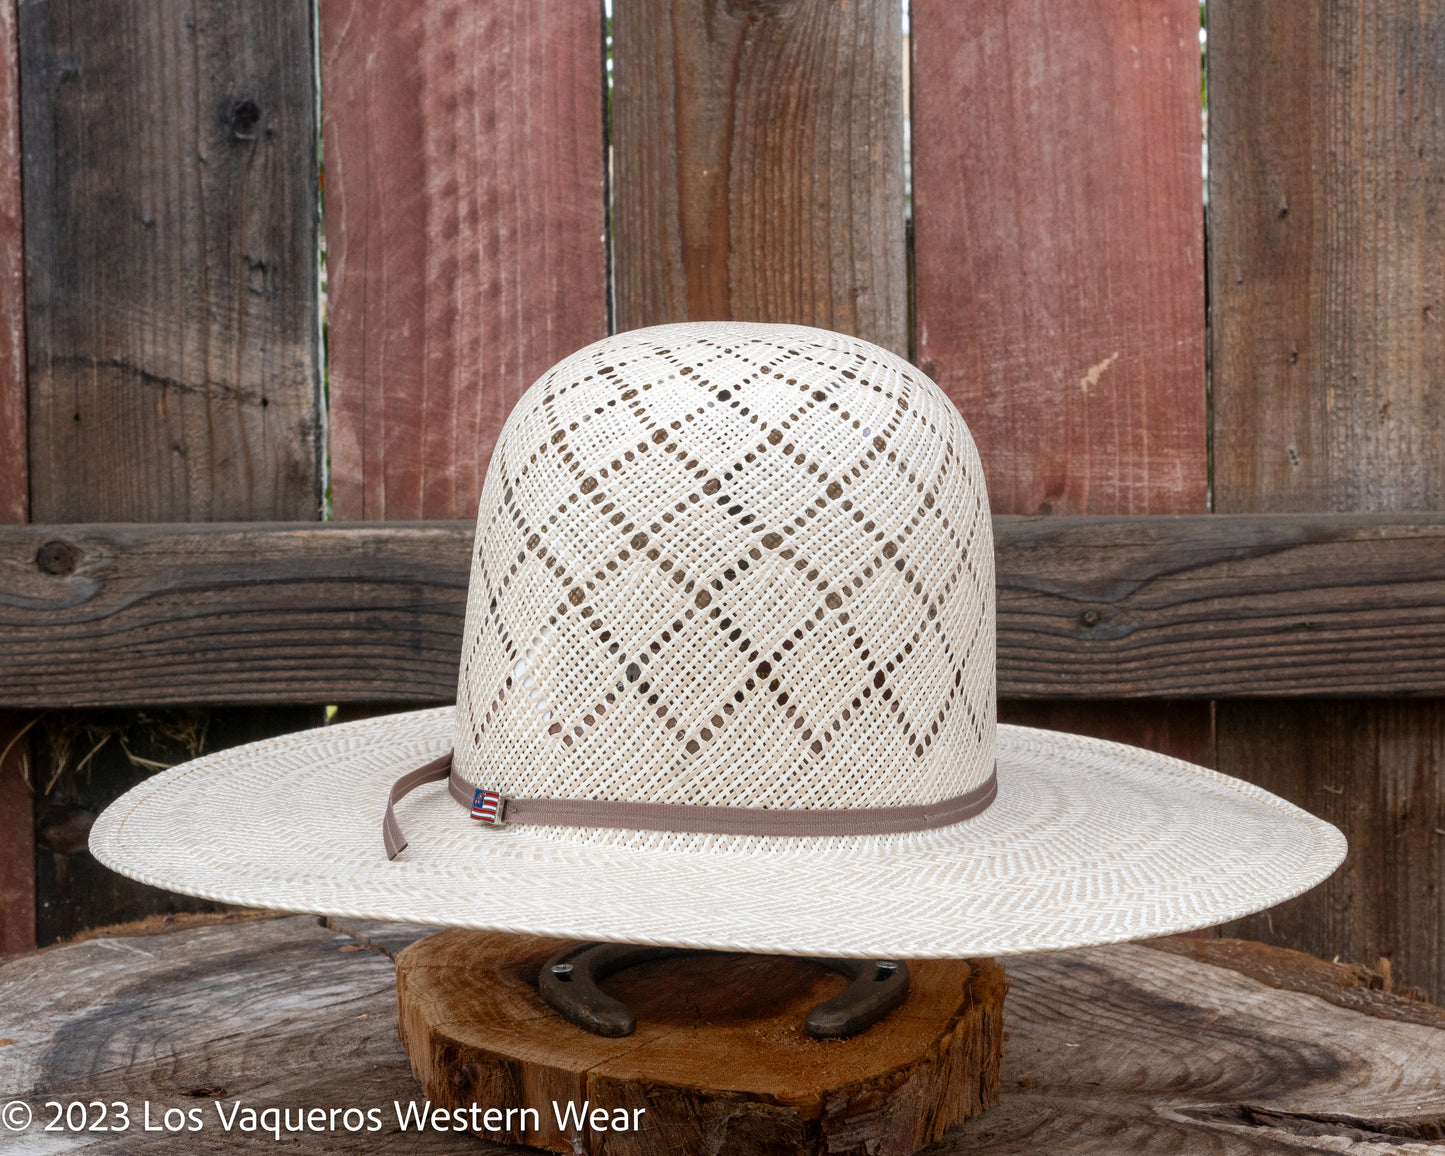 American Hat Company Straw Hat Regular Crown Patchwork Tan White